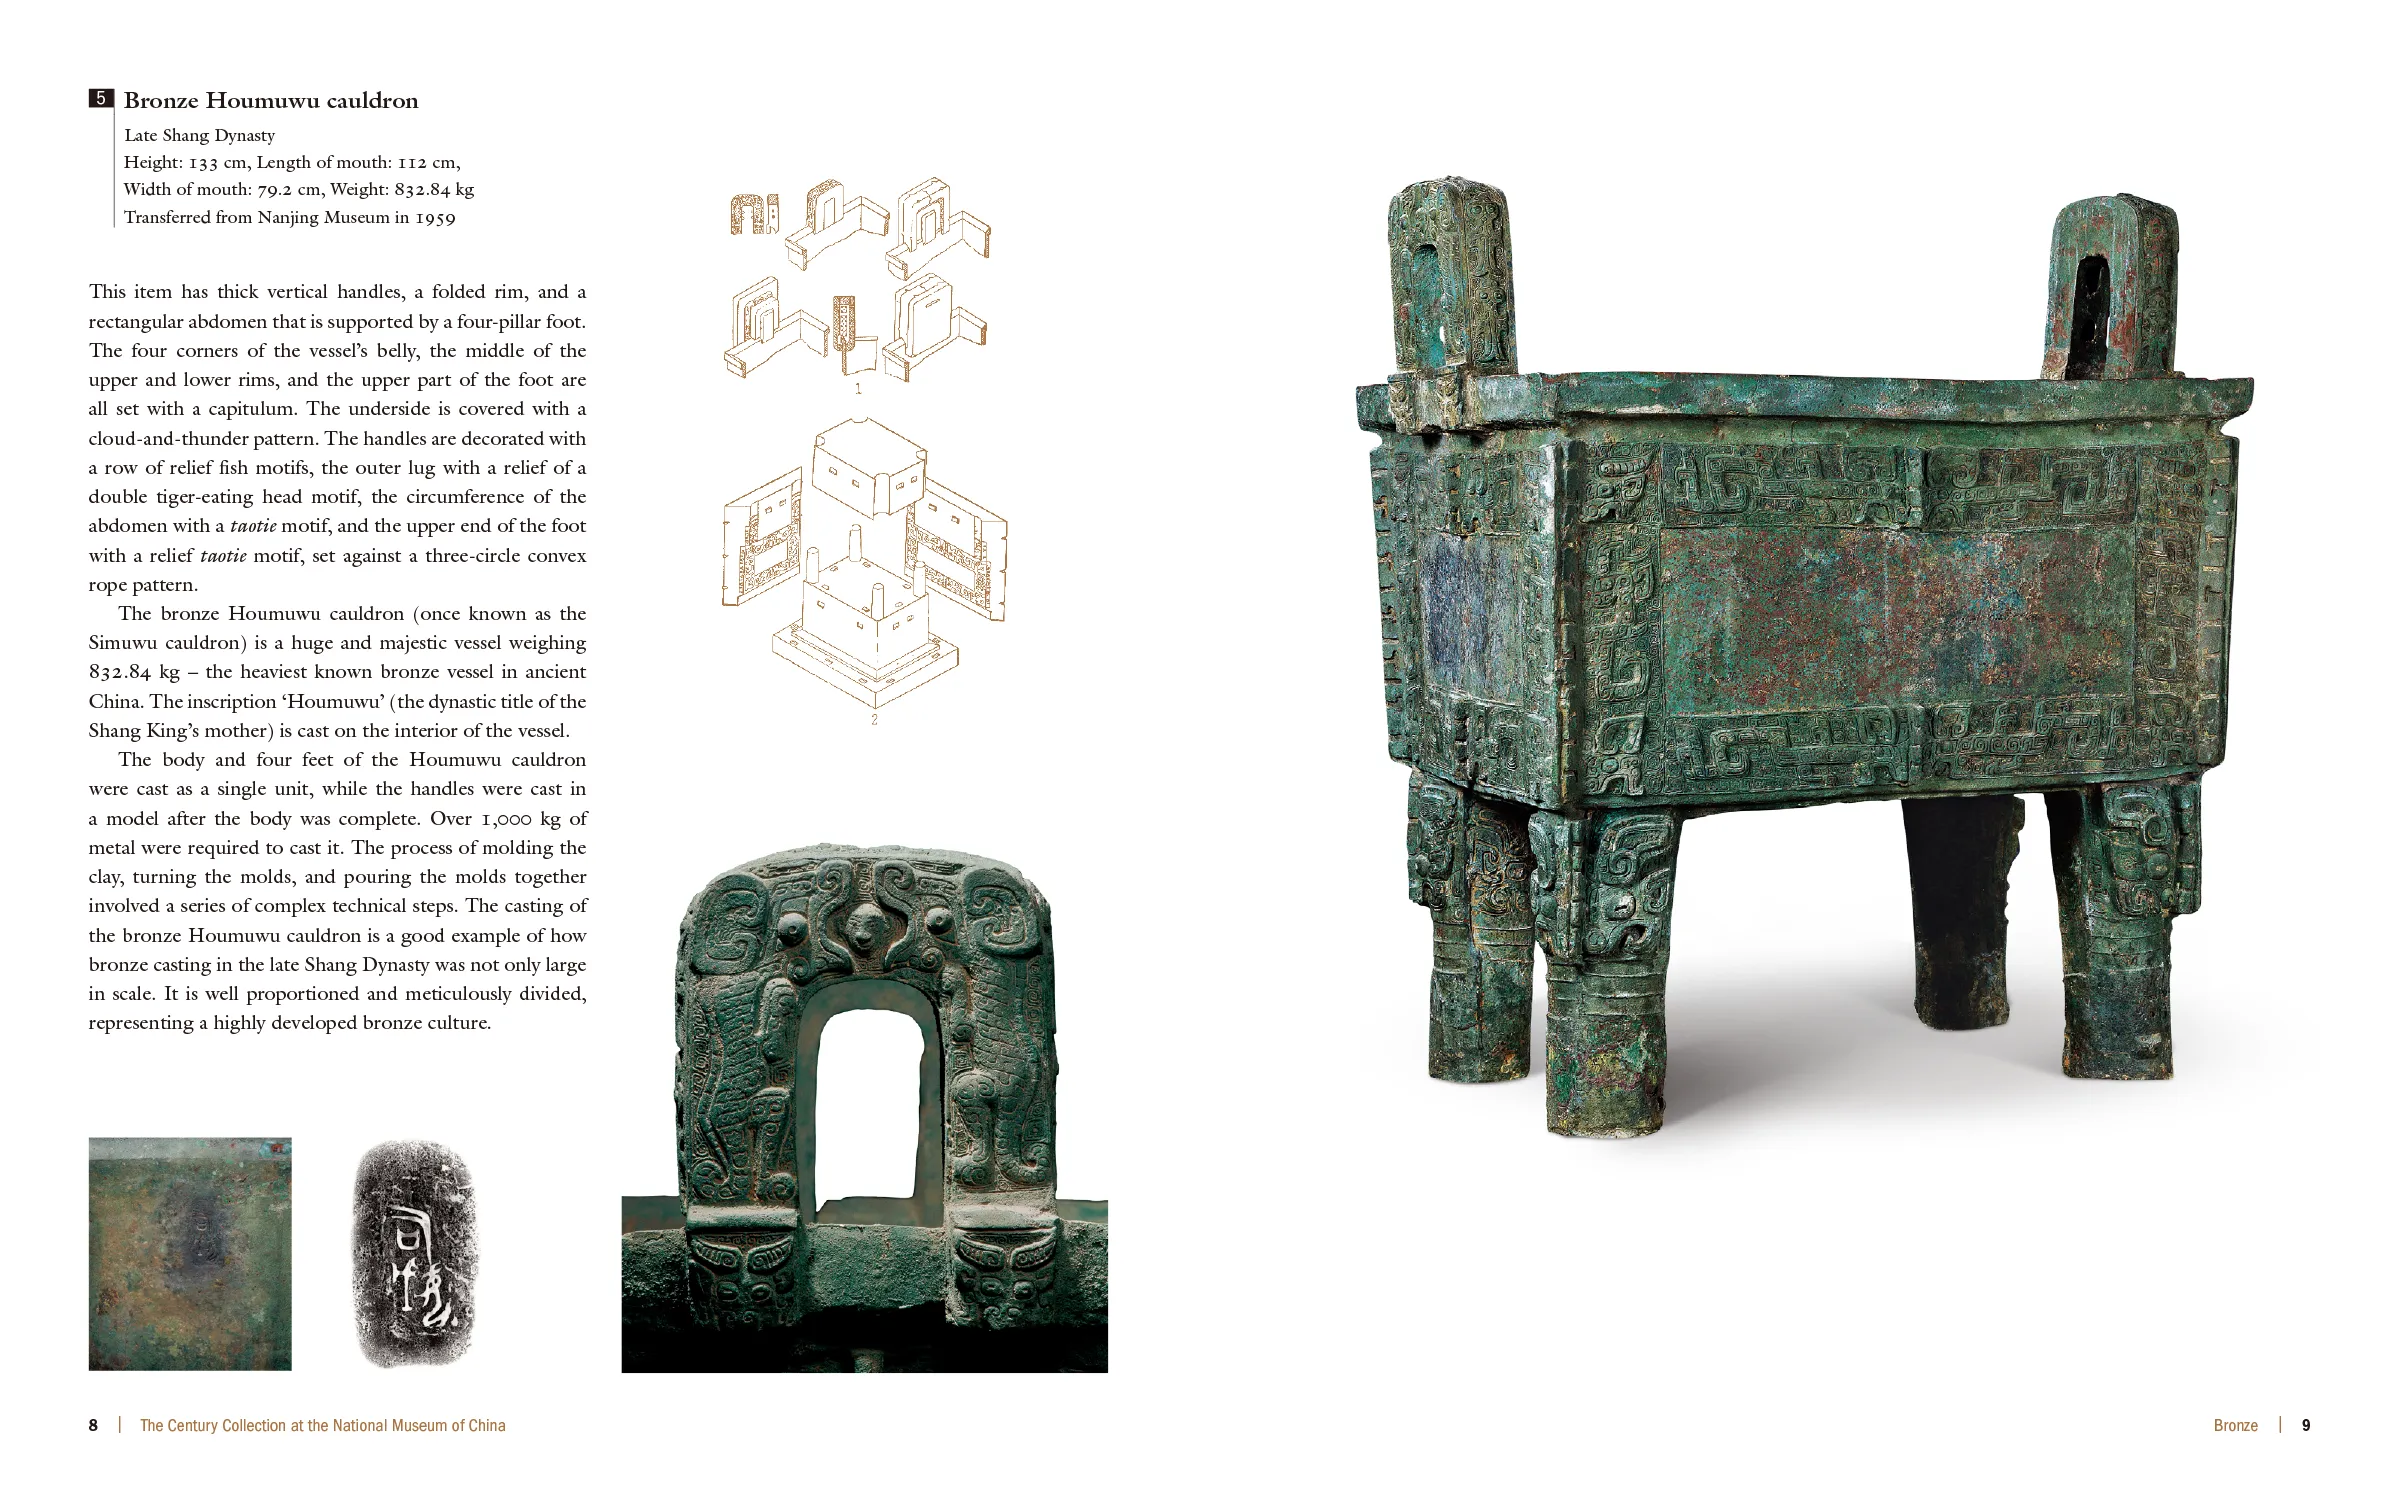 The Century Collection at The National Museum of China